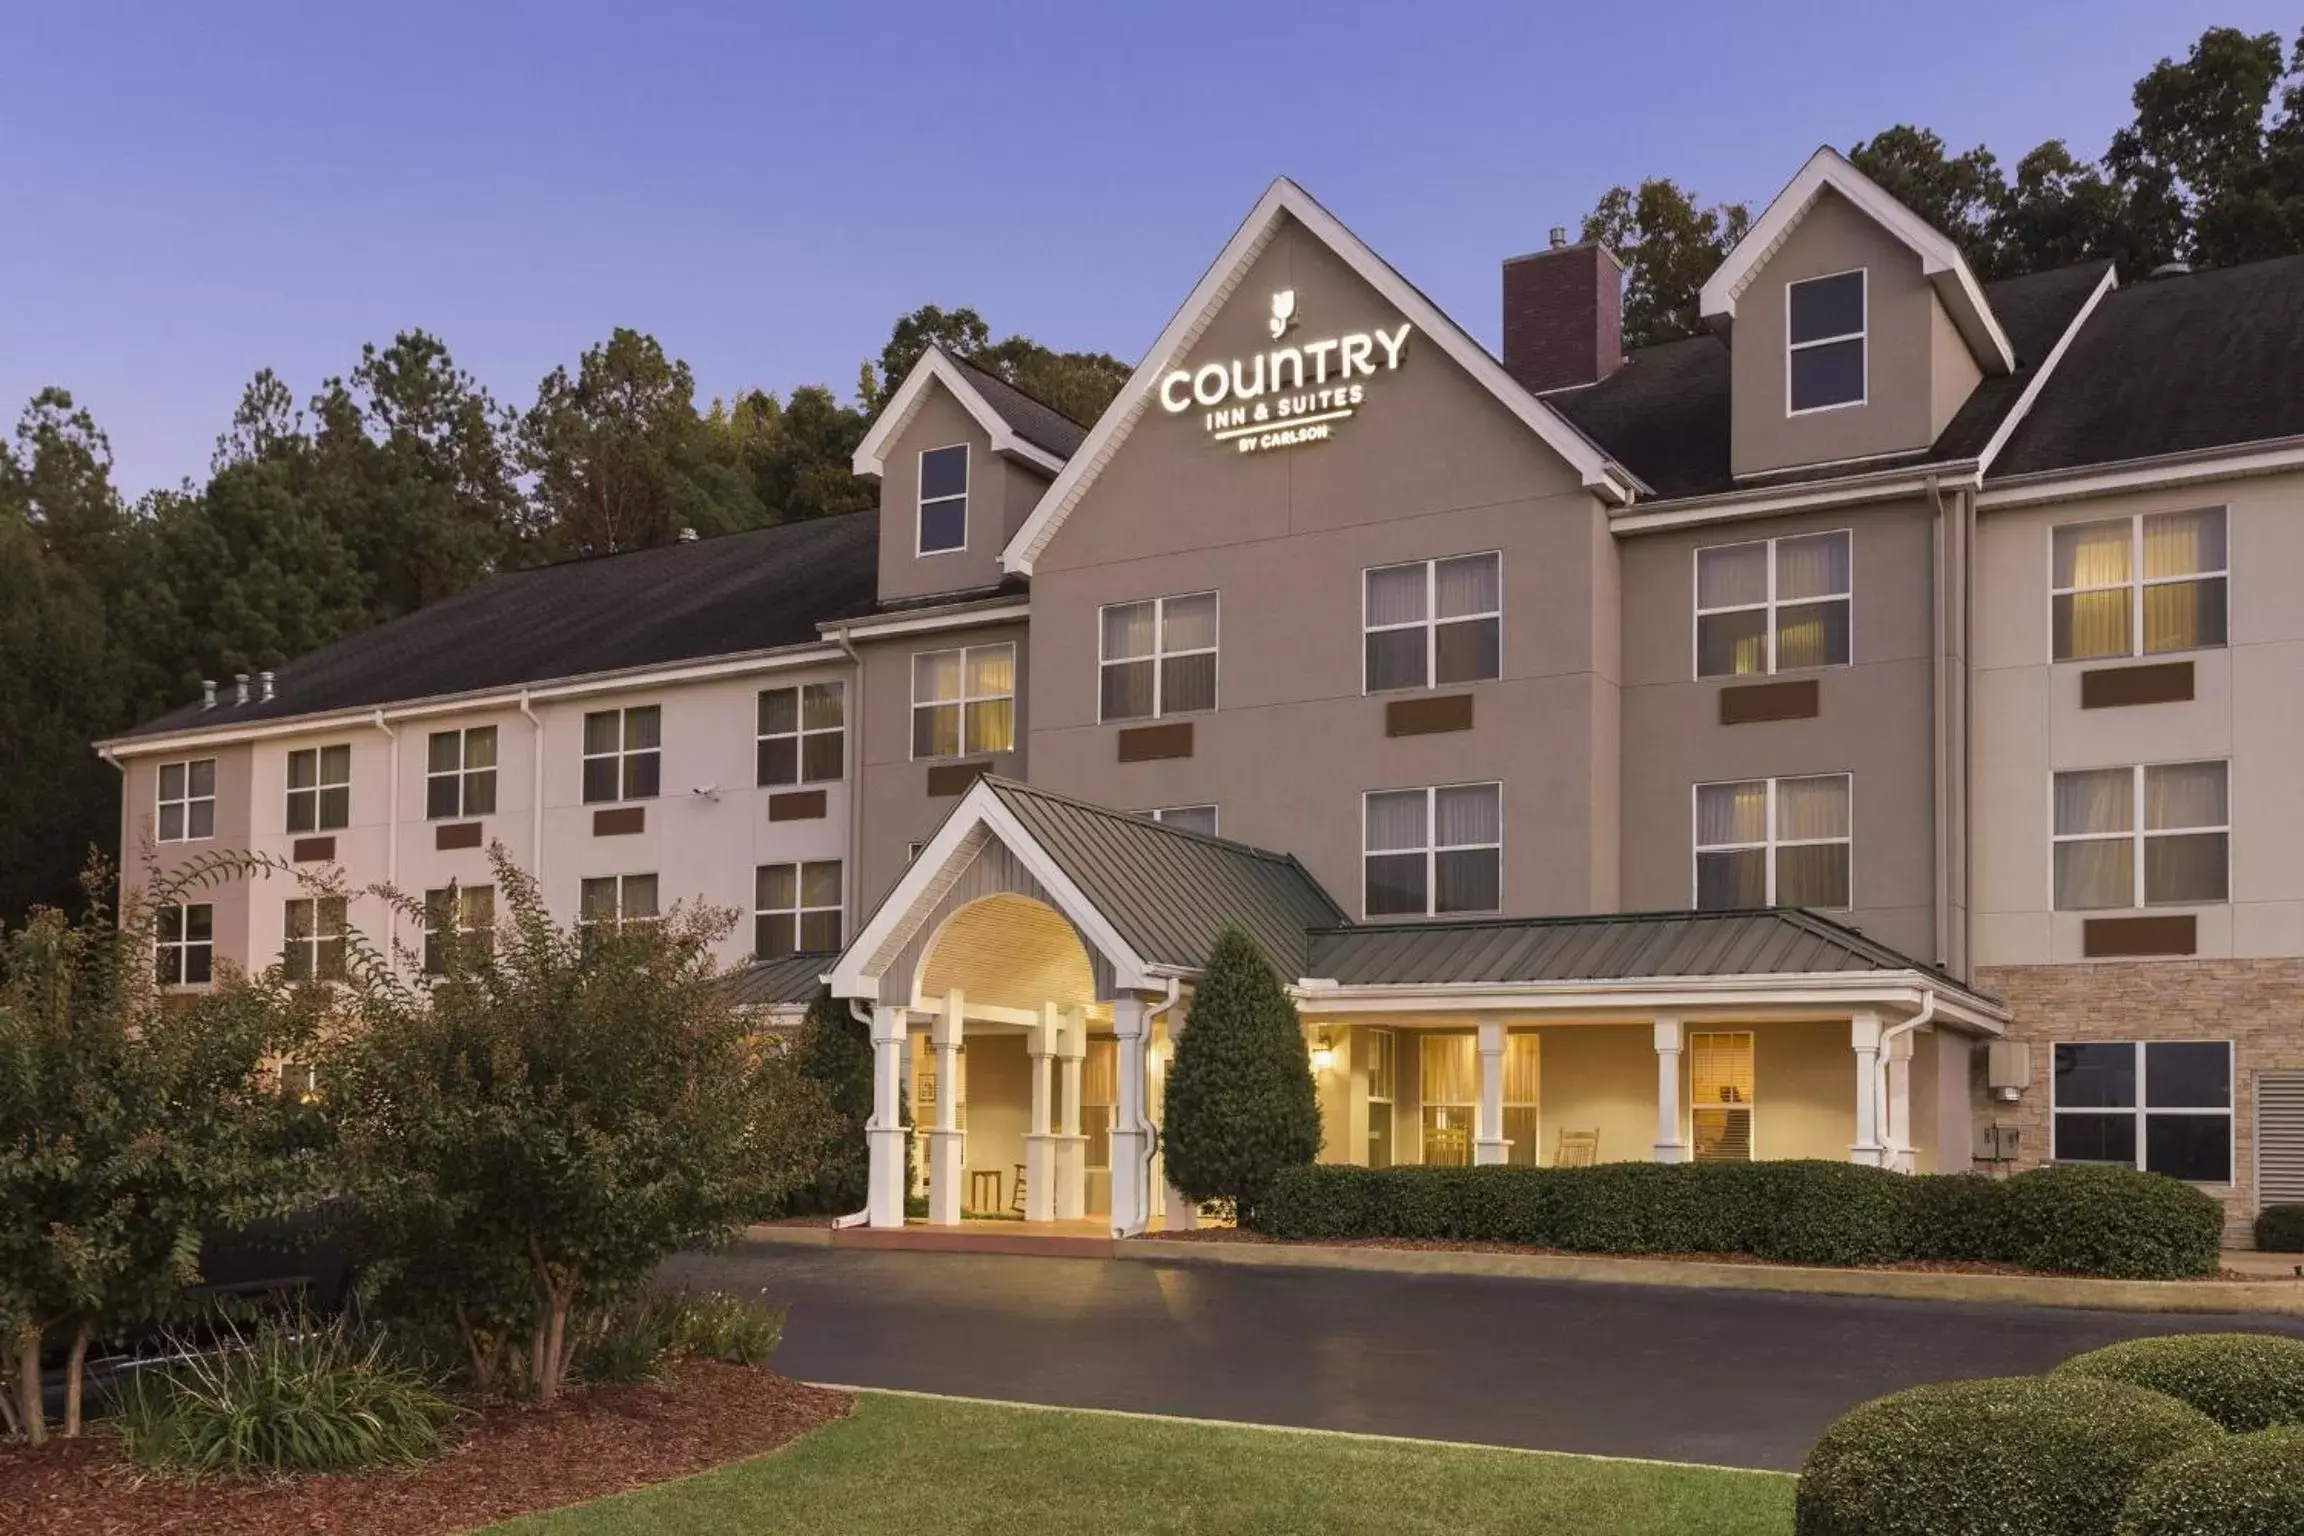 Facade/entrance, Property Building in Country Inn & Suites by Radisson, Tuscaloosa, AL